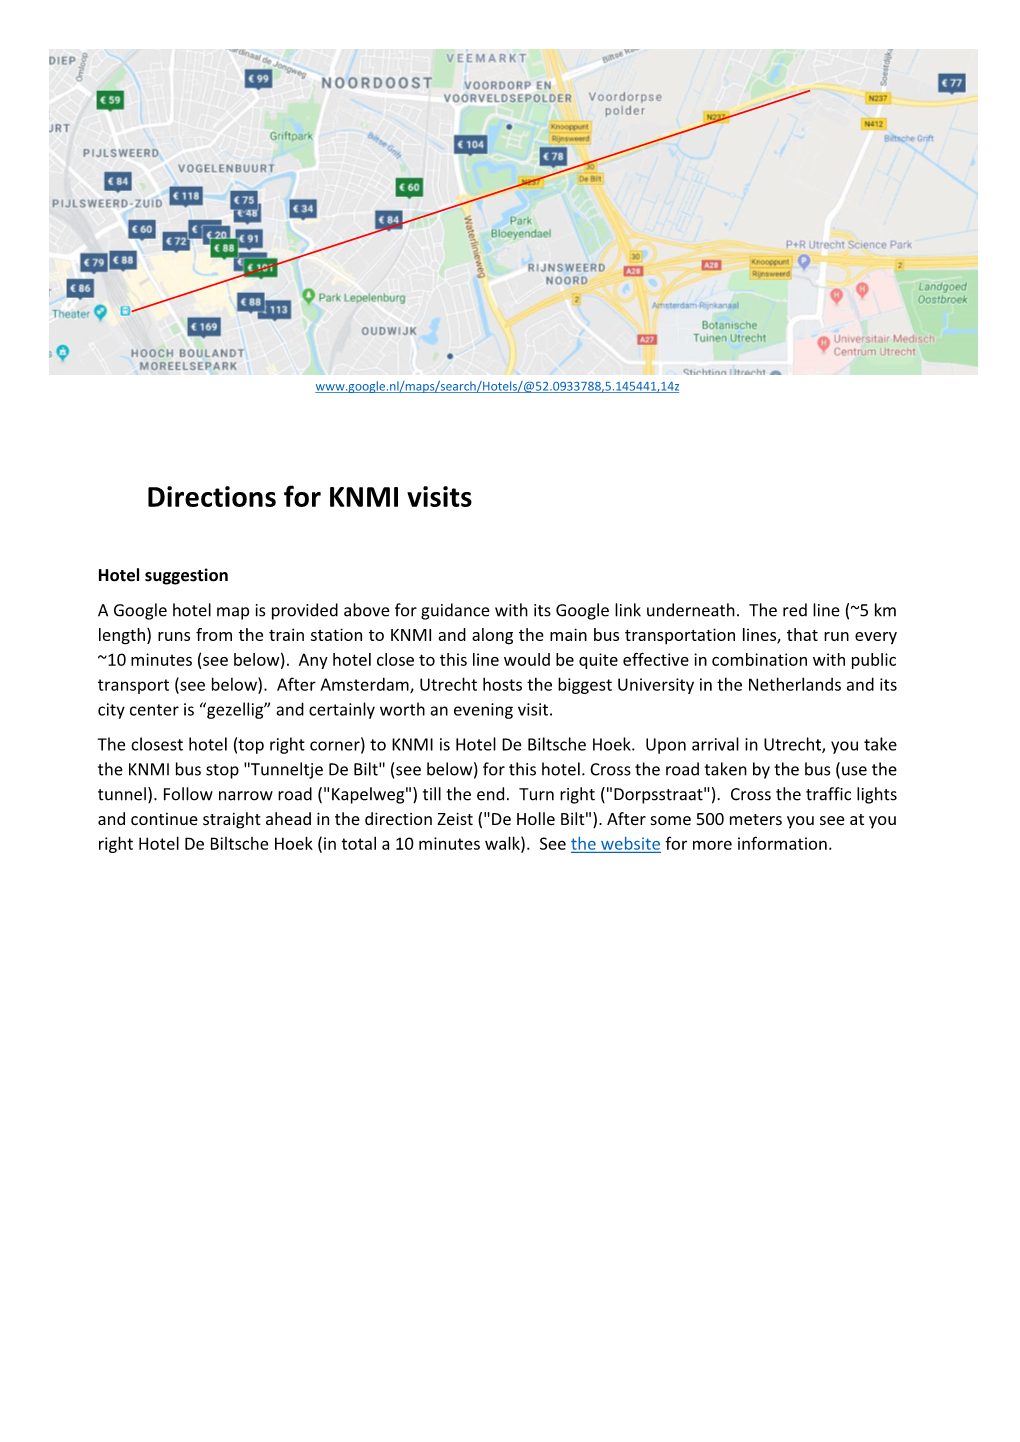 Directions for KNMI Visits